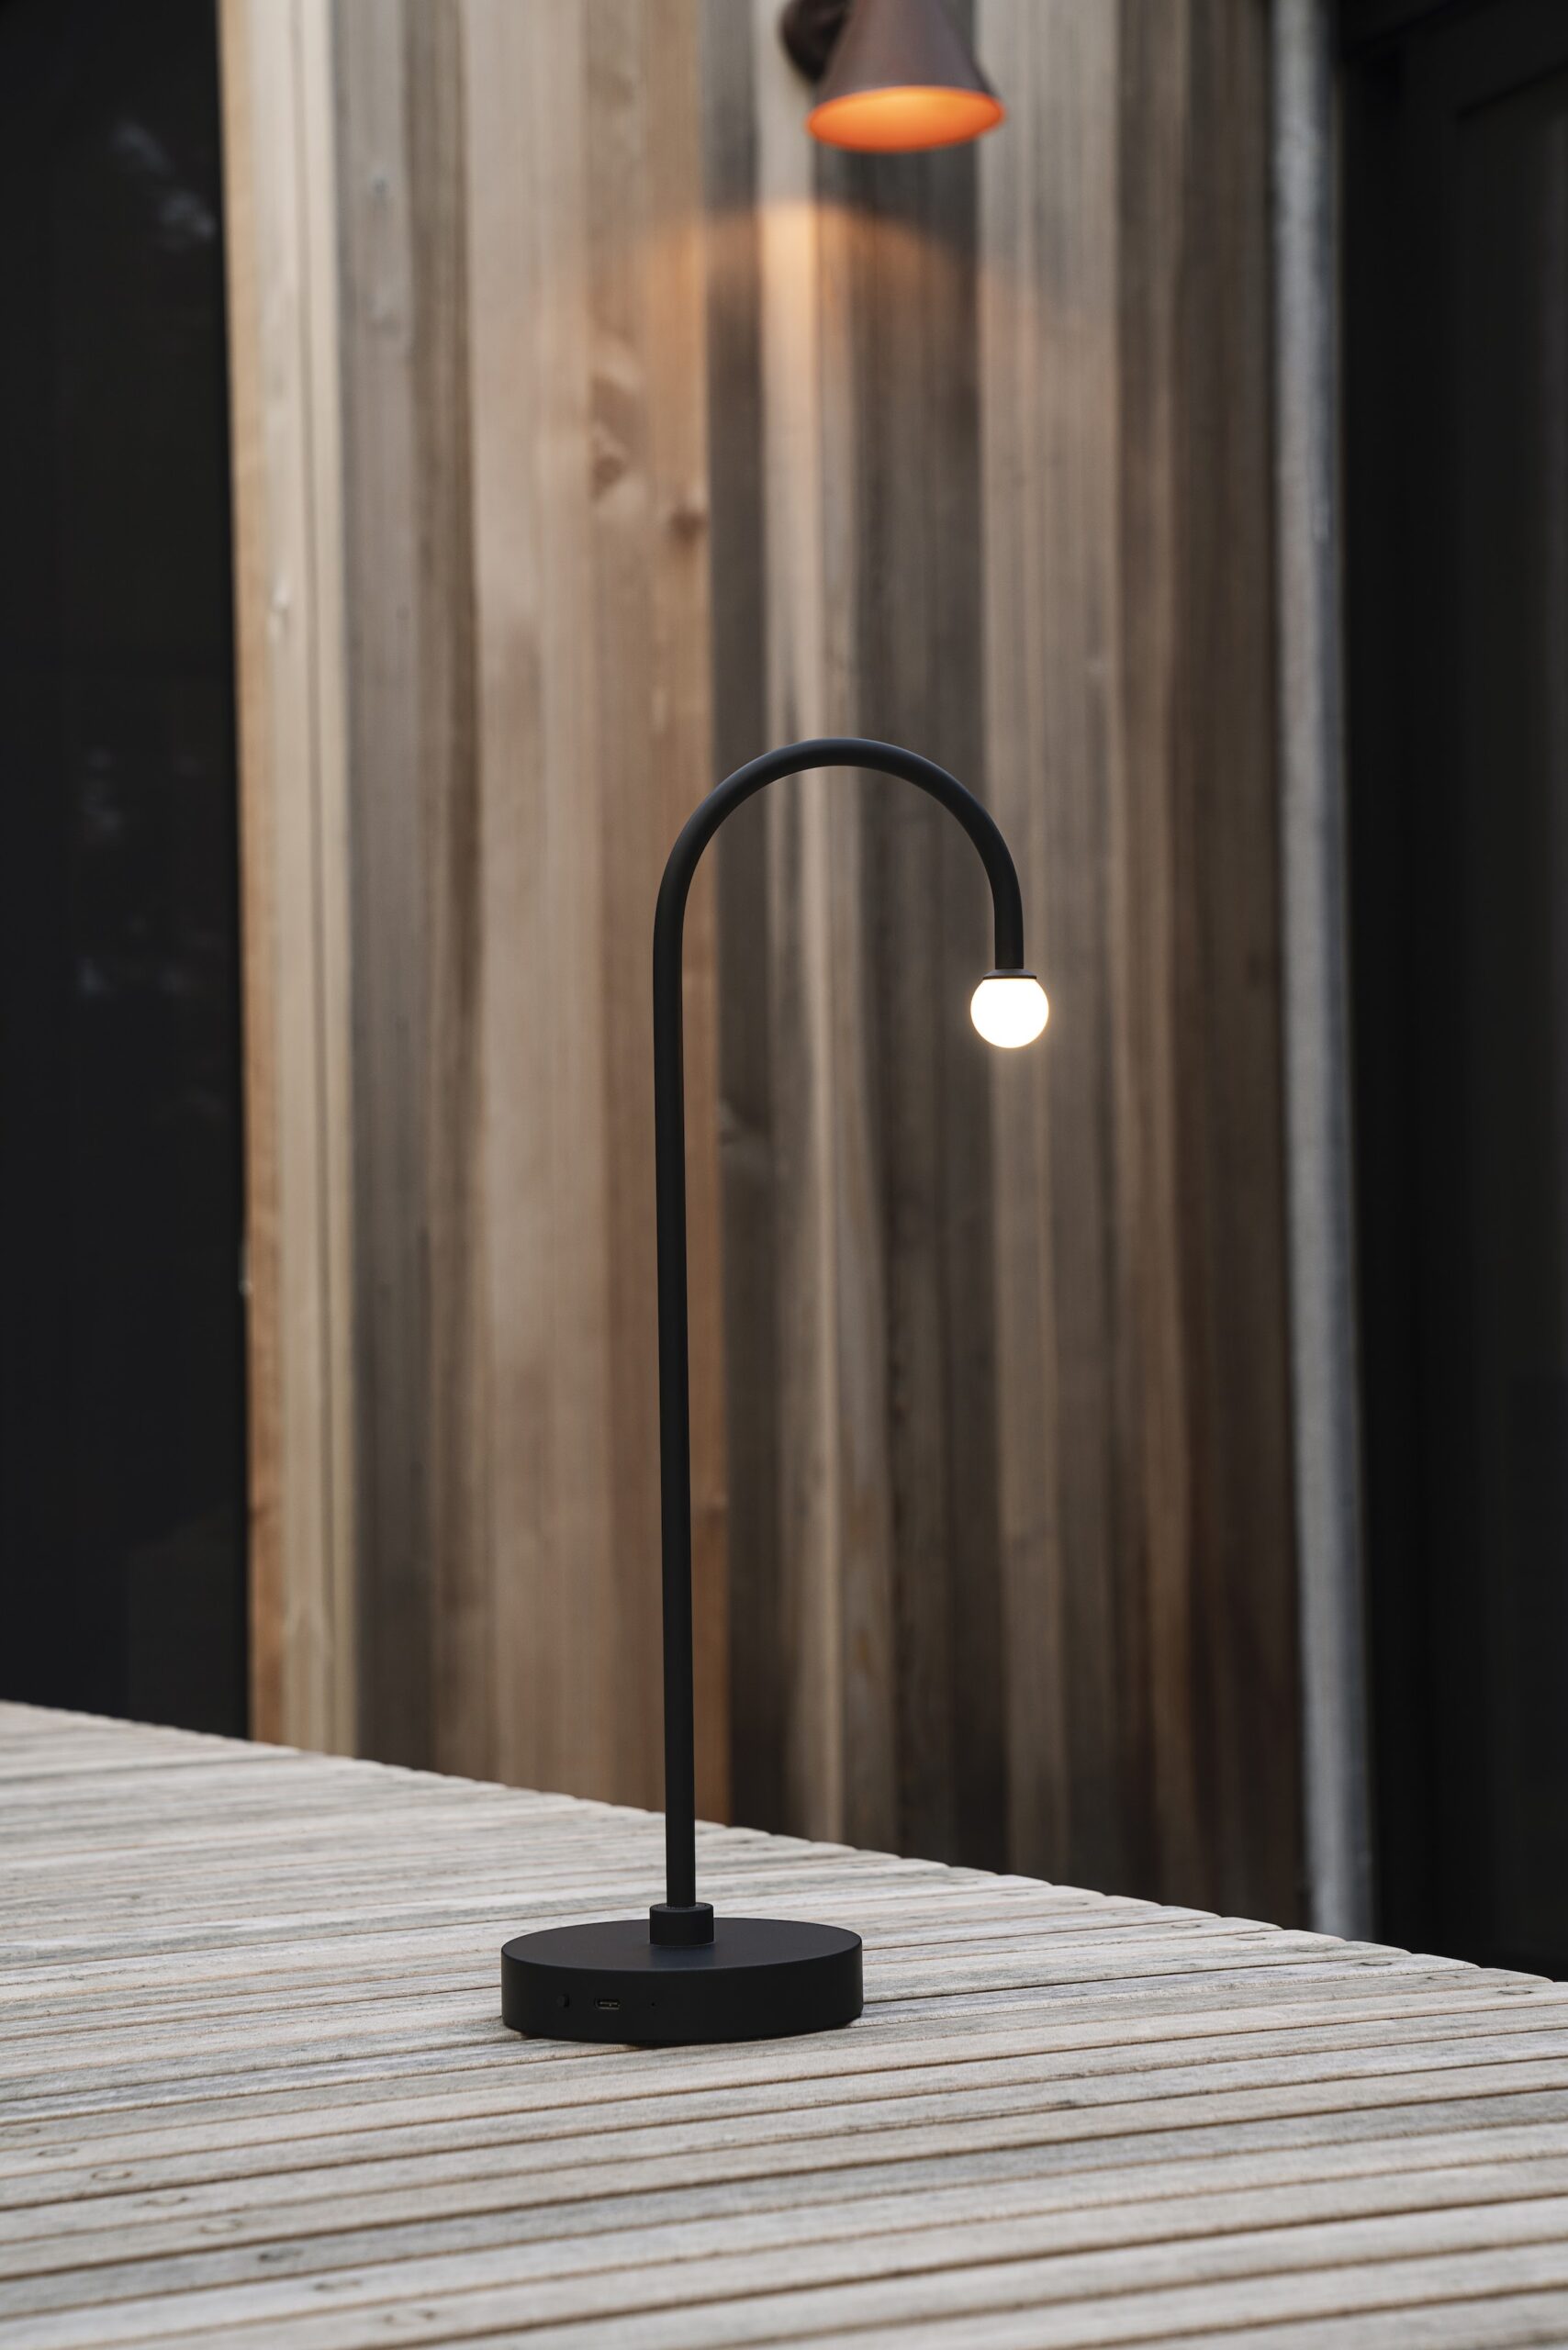 Thin black table lamp with small hanging bulb. Minimalist furniture.